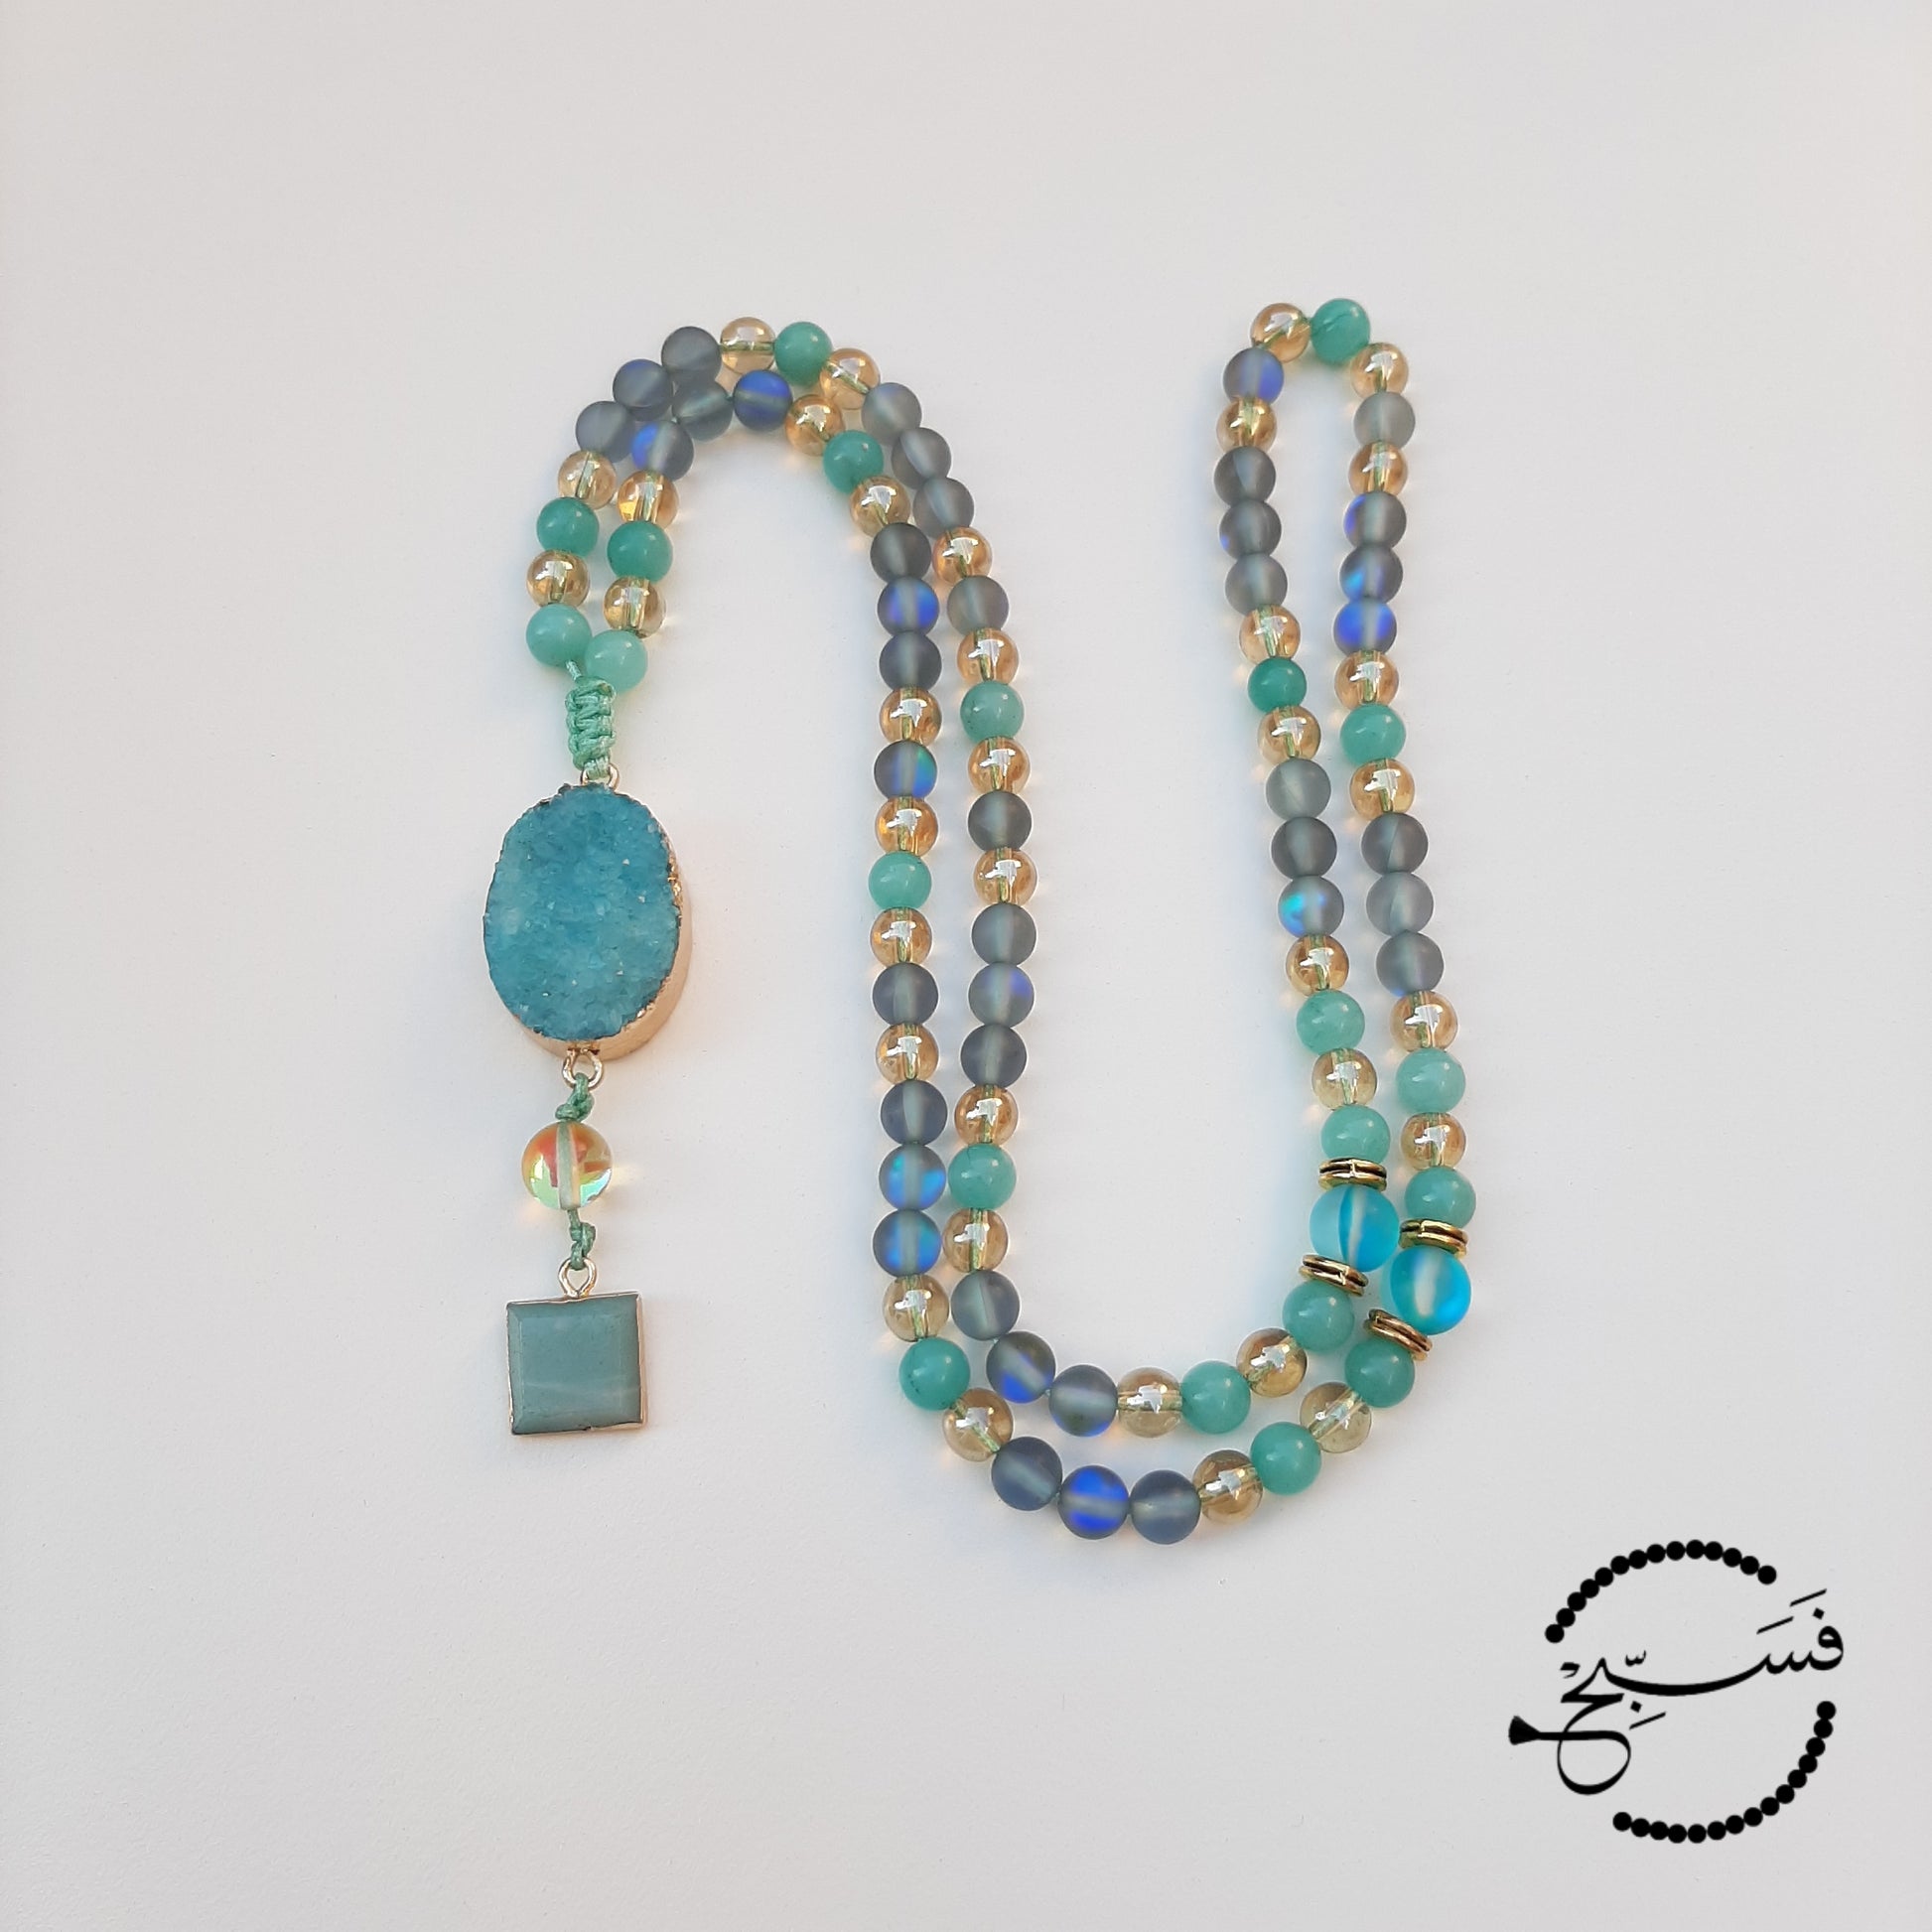 A different take on our best selling amazonite and moonstone combination. Natural amazonite beads, grey Austrian moonstone and gold beads make a stunning tasbih.  This version is finished with a druzy pendant and a mini amazonite pendant, for that little bit of extra luxury.  Packaged in a luxurious pouch and a gift box.  99 beads